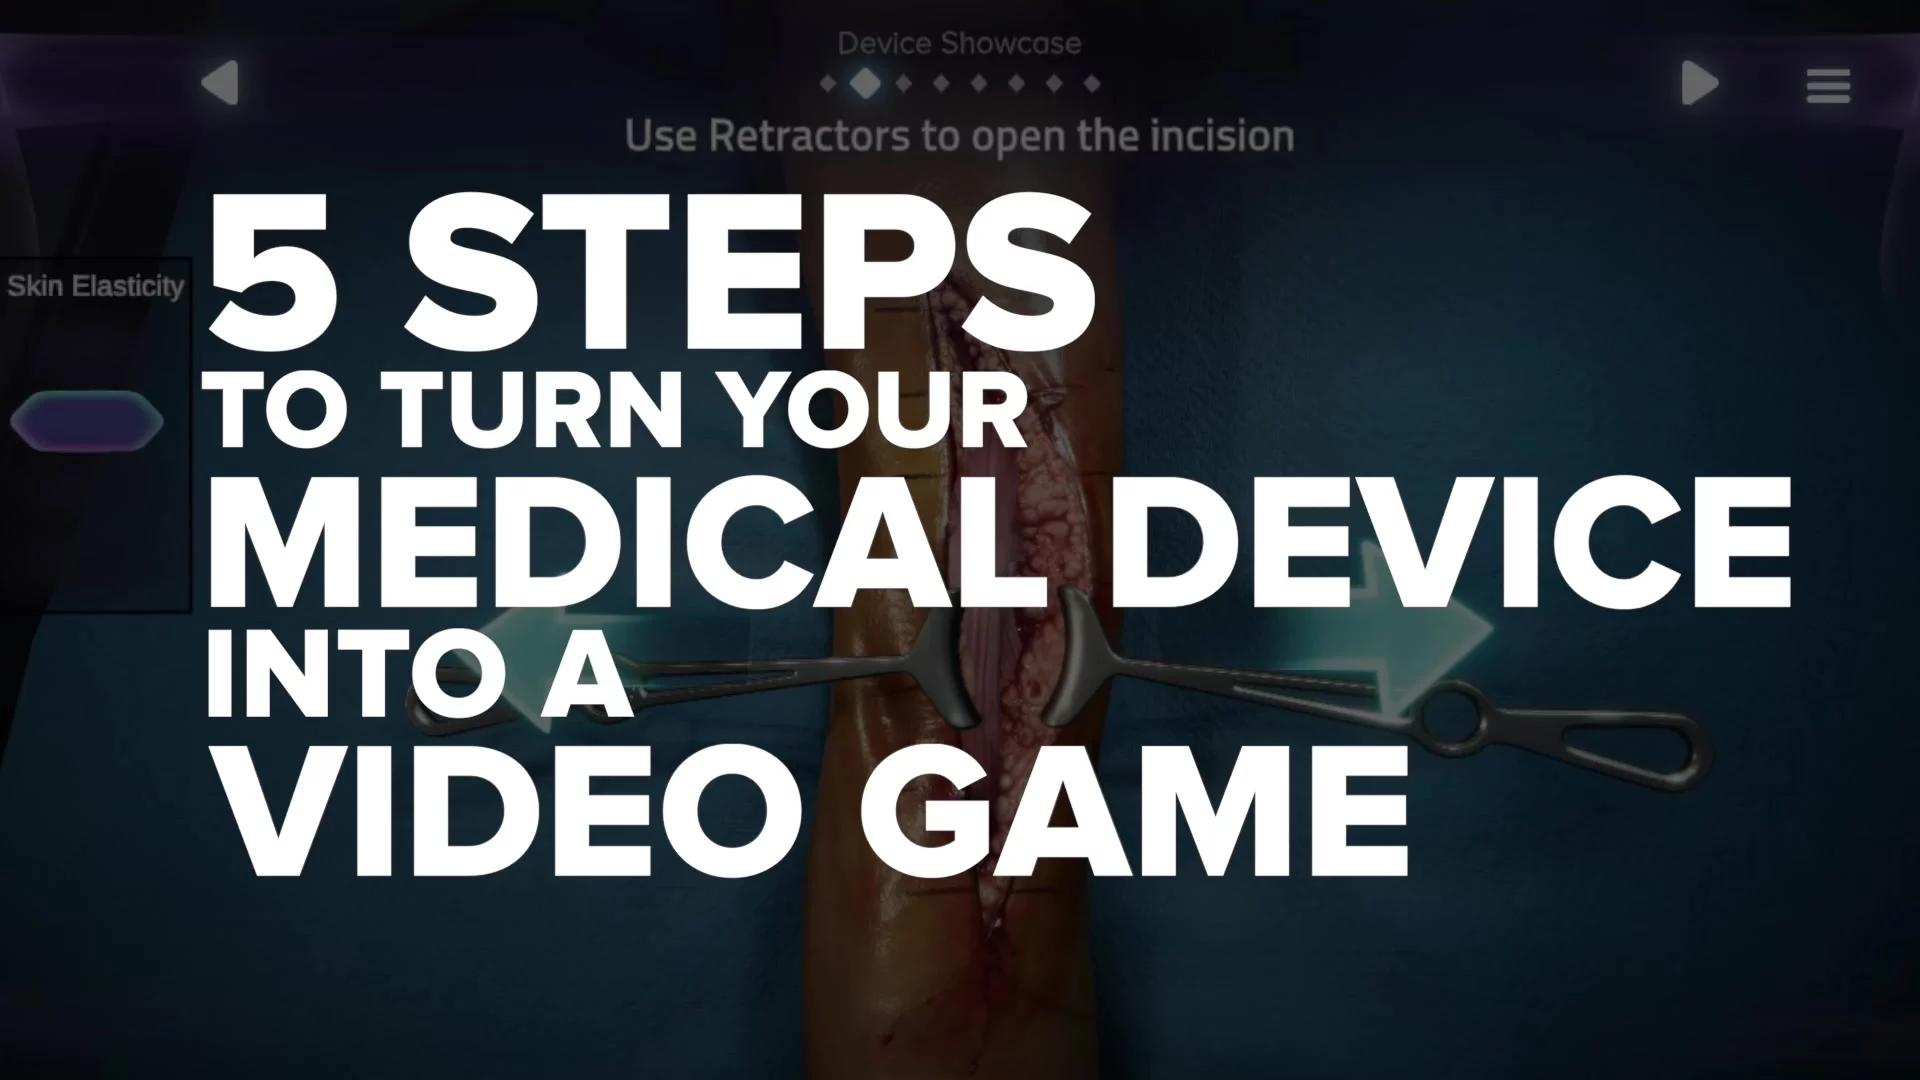 5 Steps to Turn Your Medical Device into a Video Game